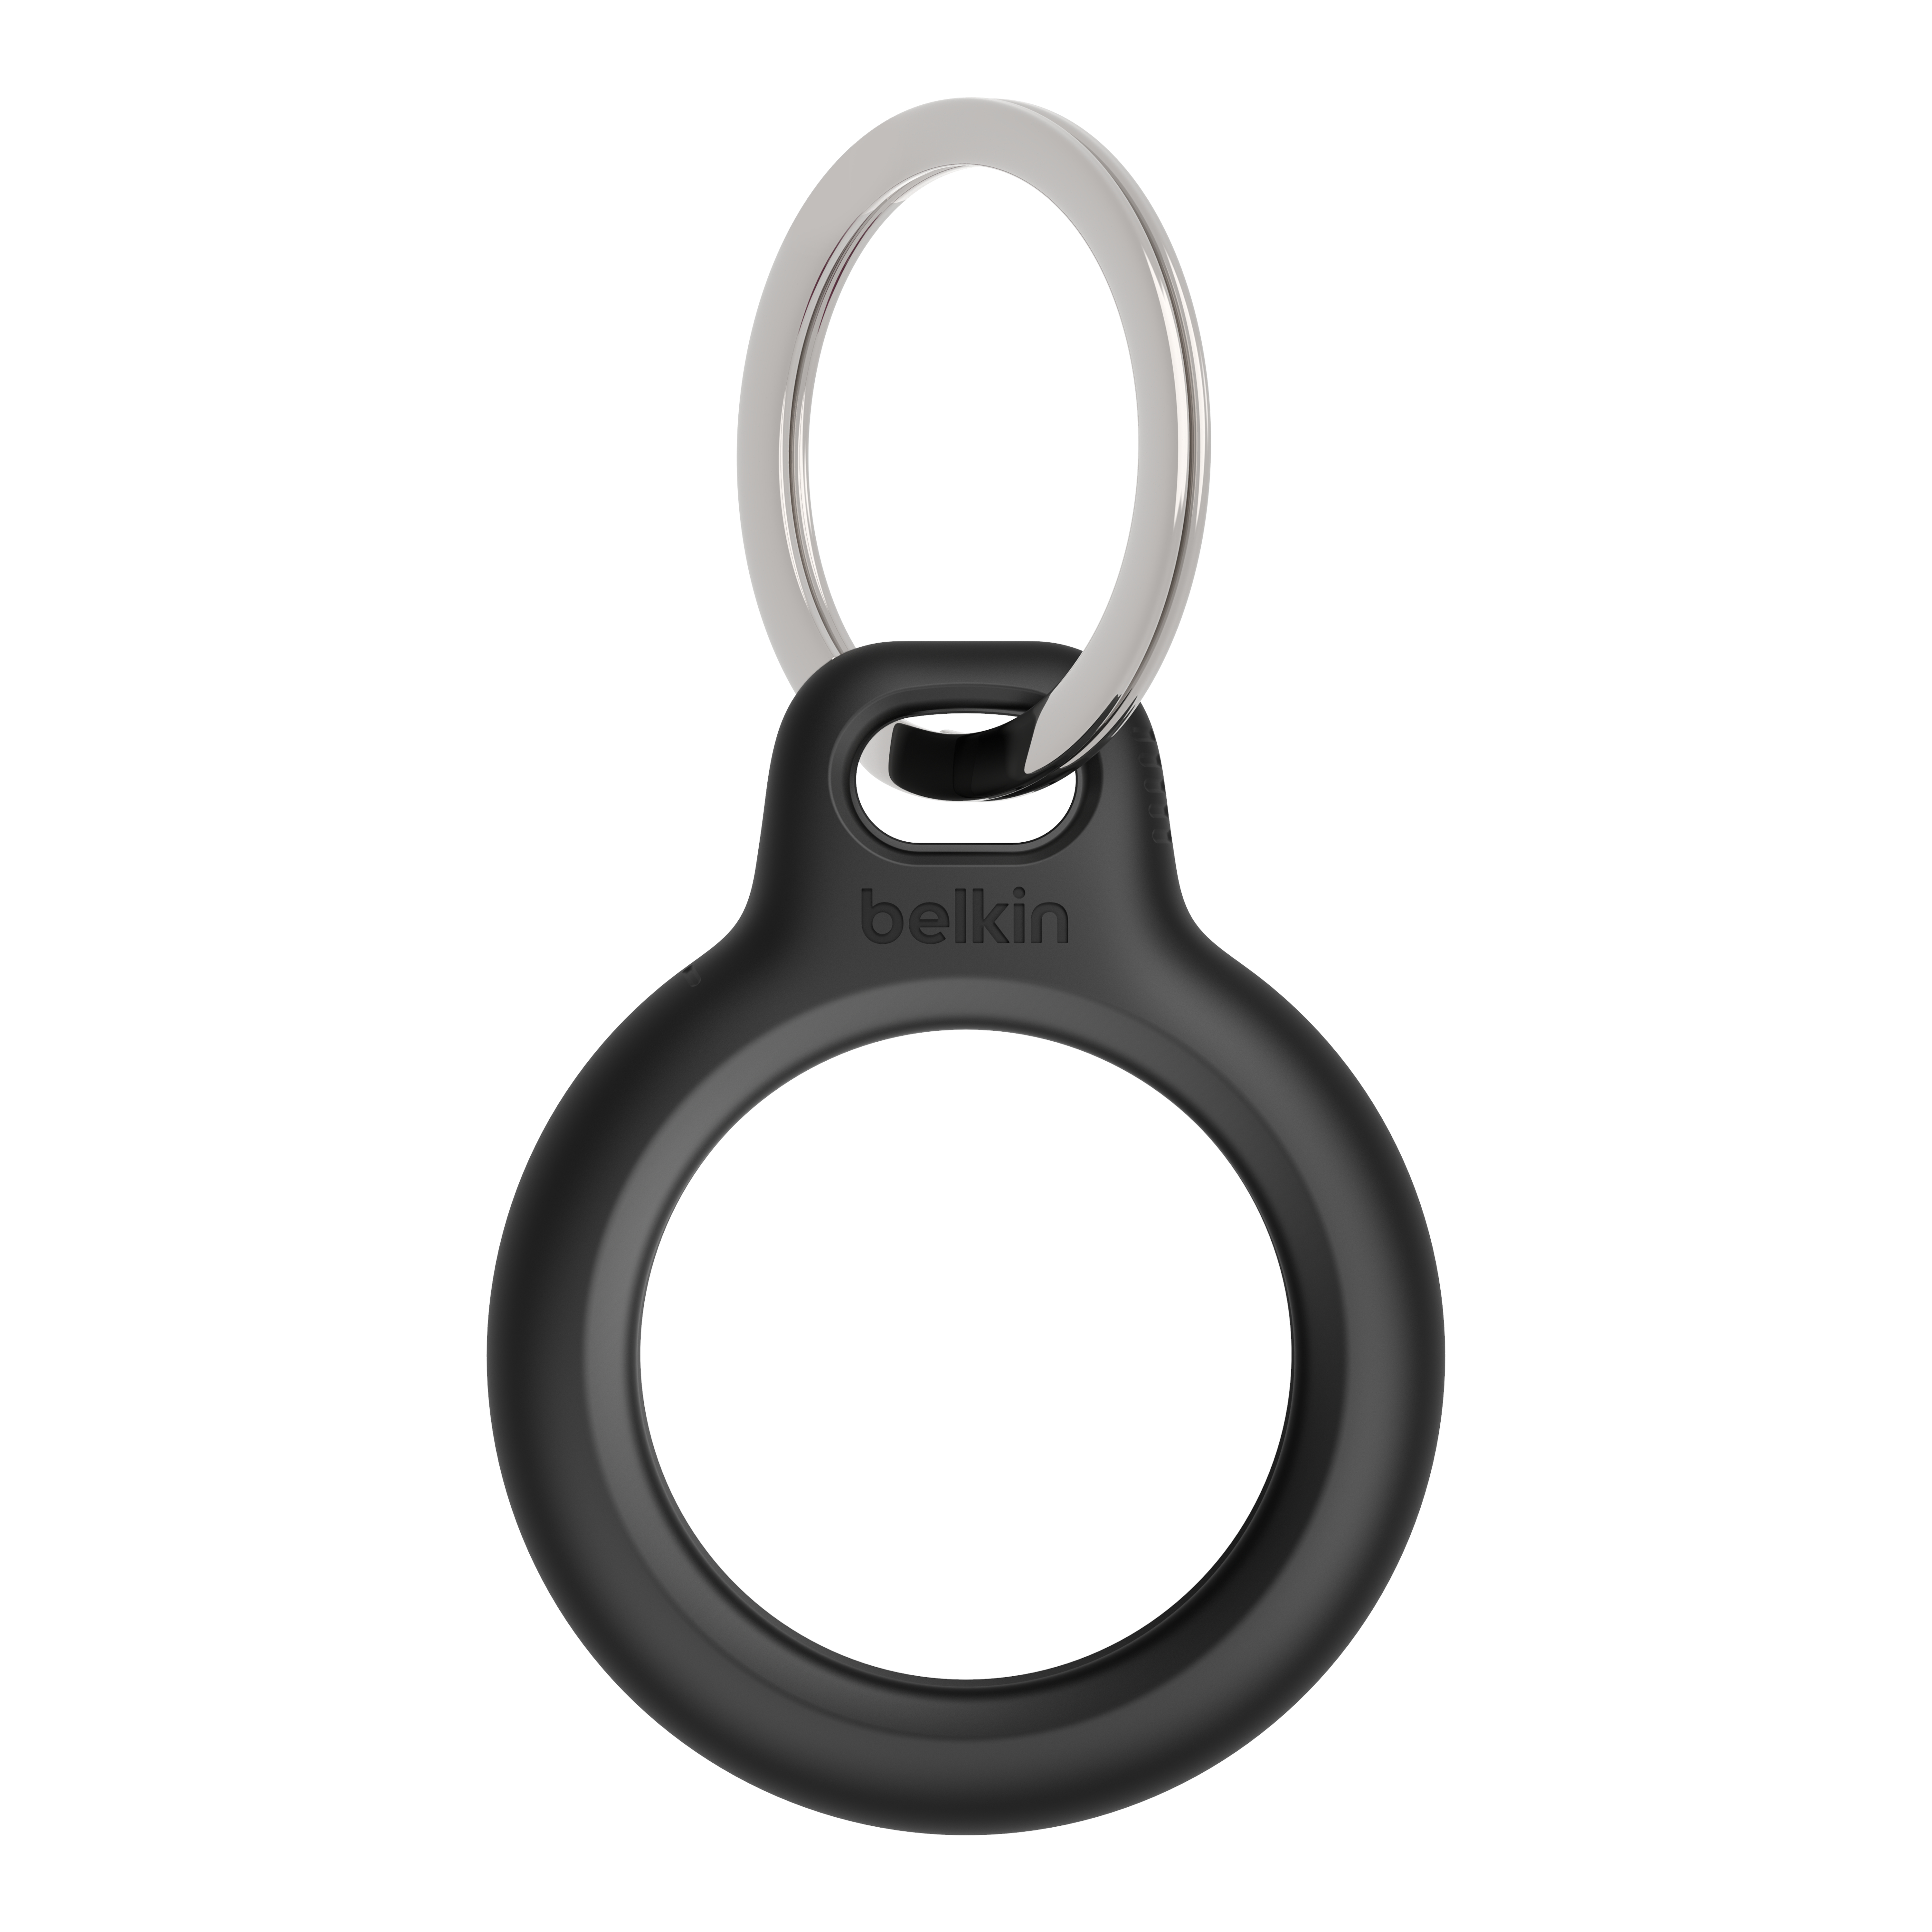 Belkin Secure Holder with Key Ring for AirTag, Black - image 1 of 14